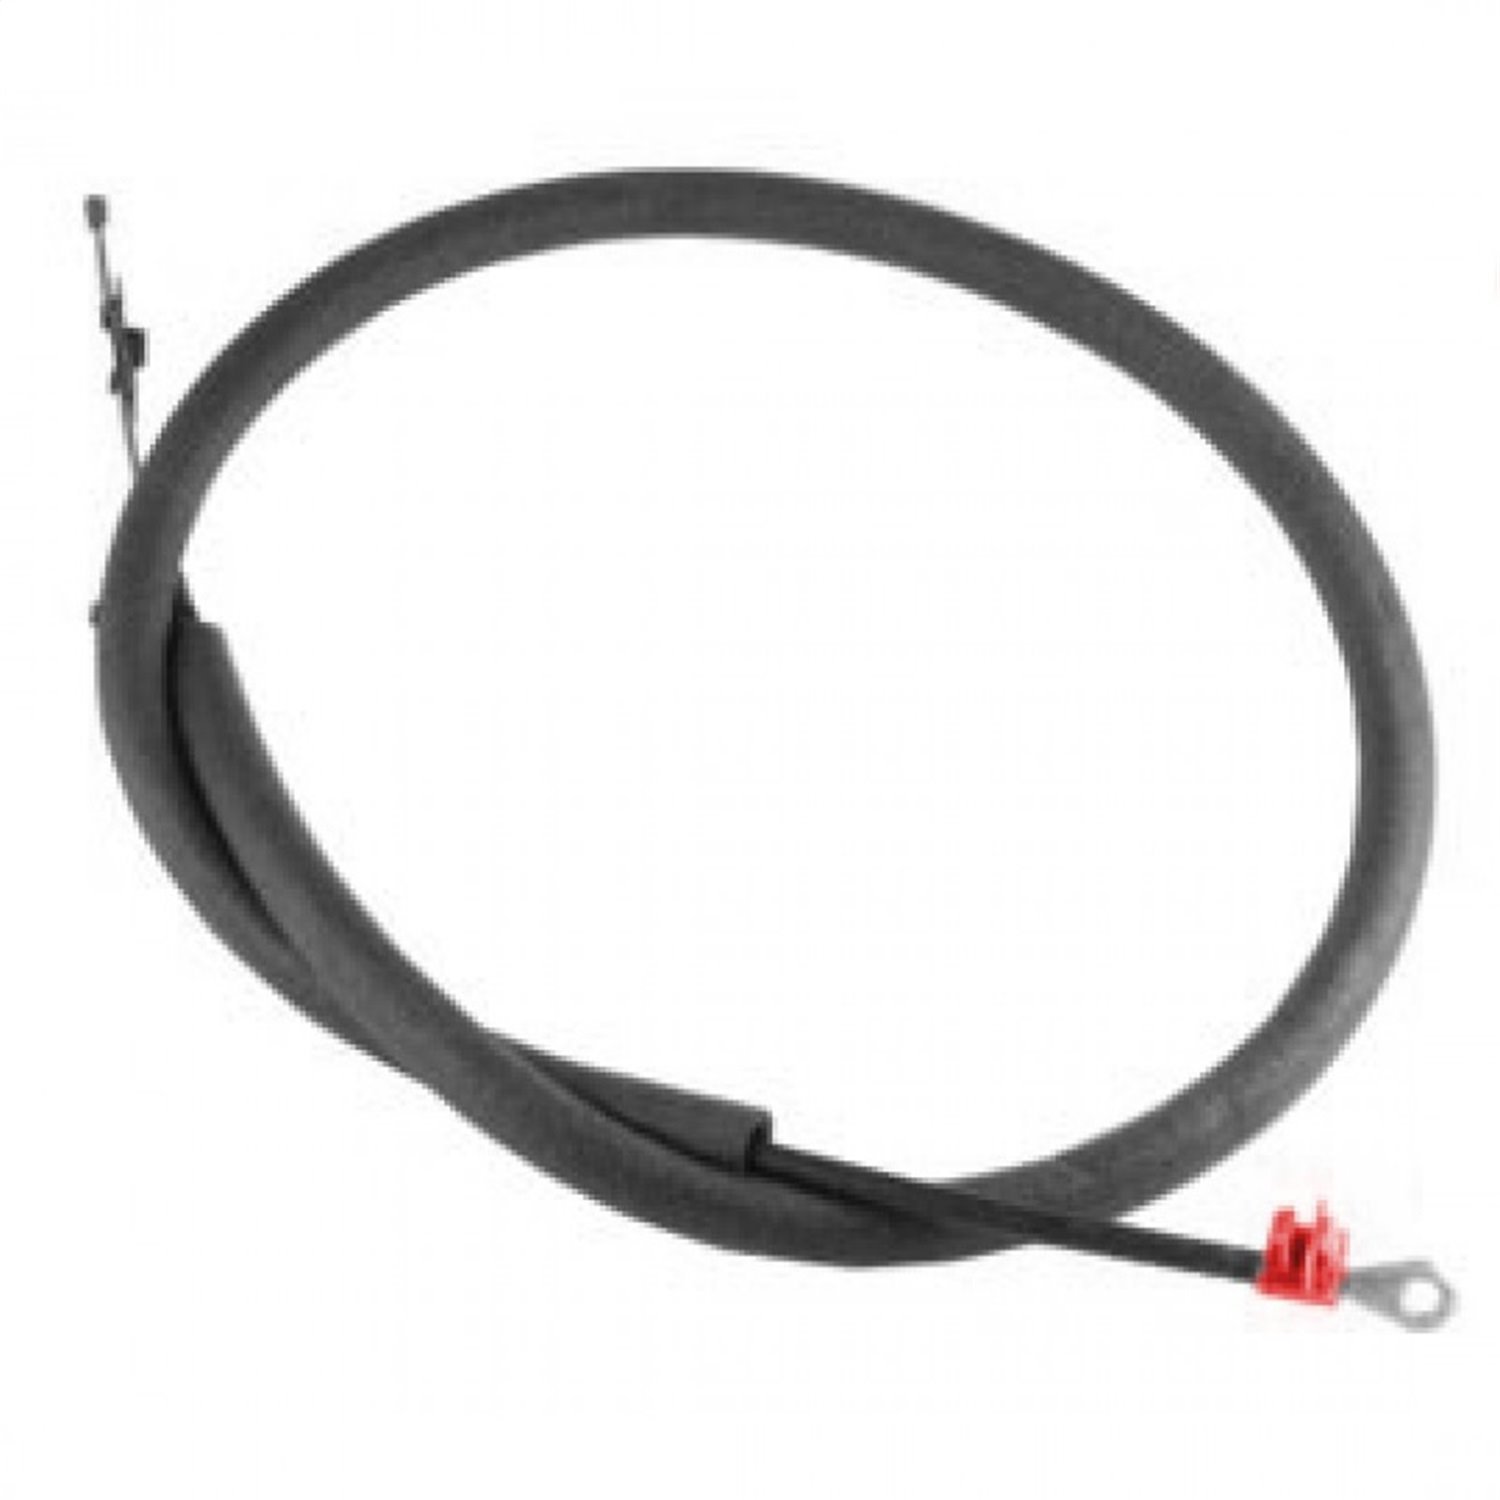 Heater Defroster Cable Red End 87-95 Wrangler